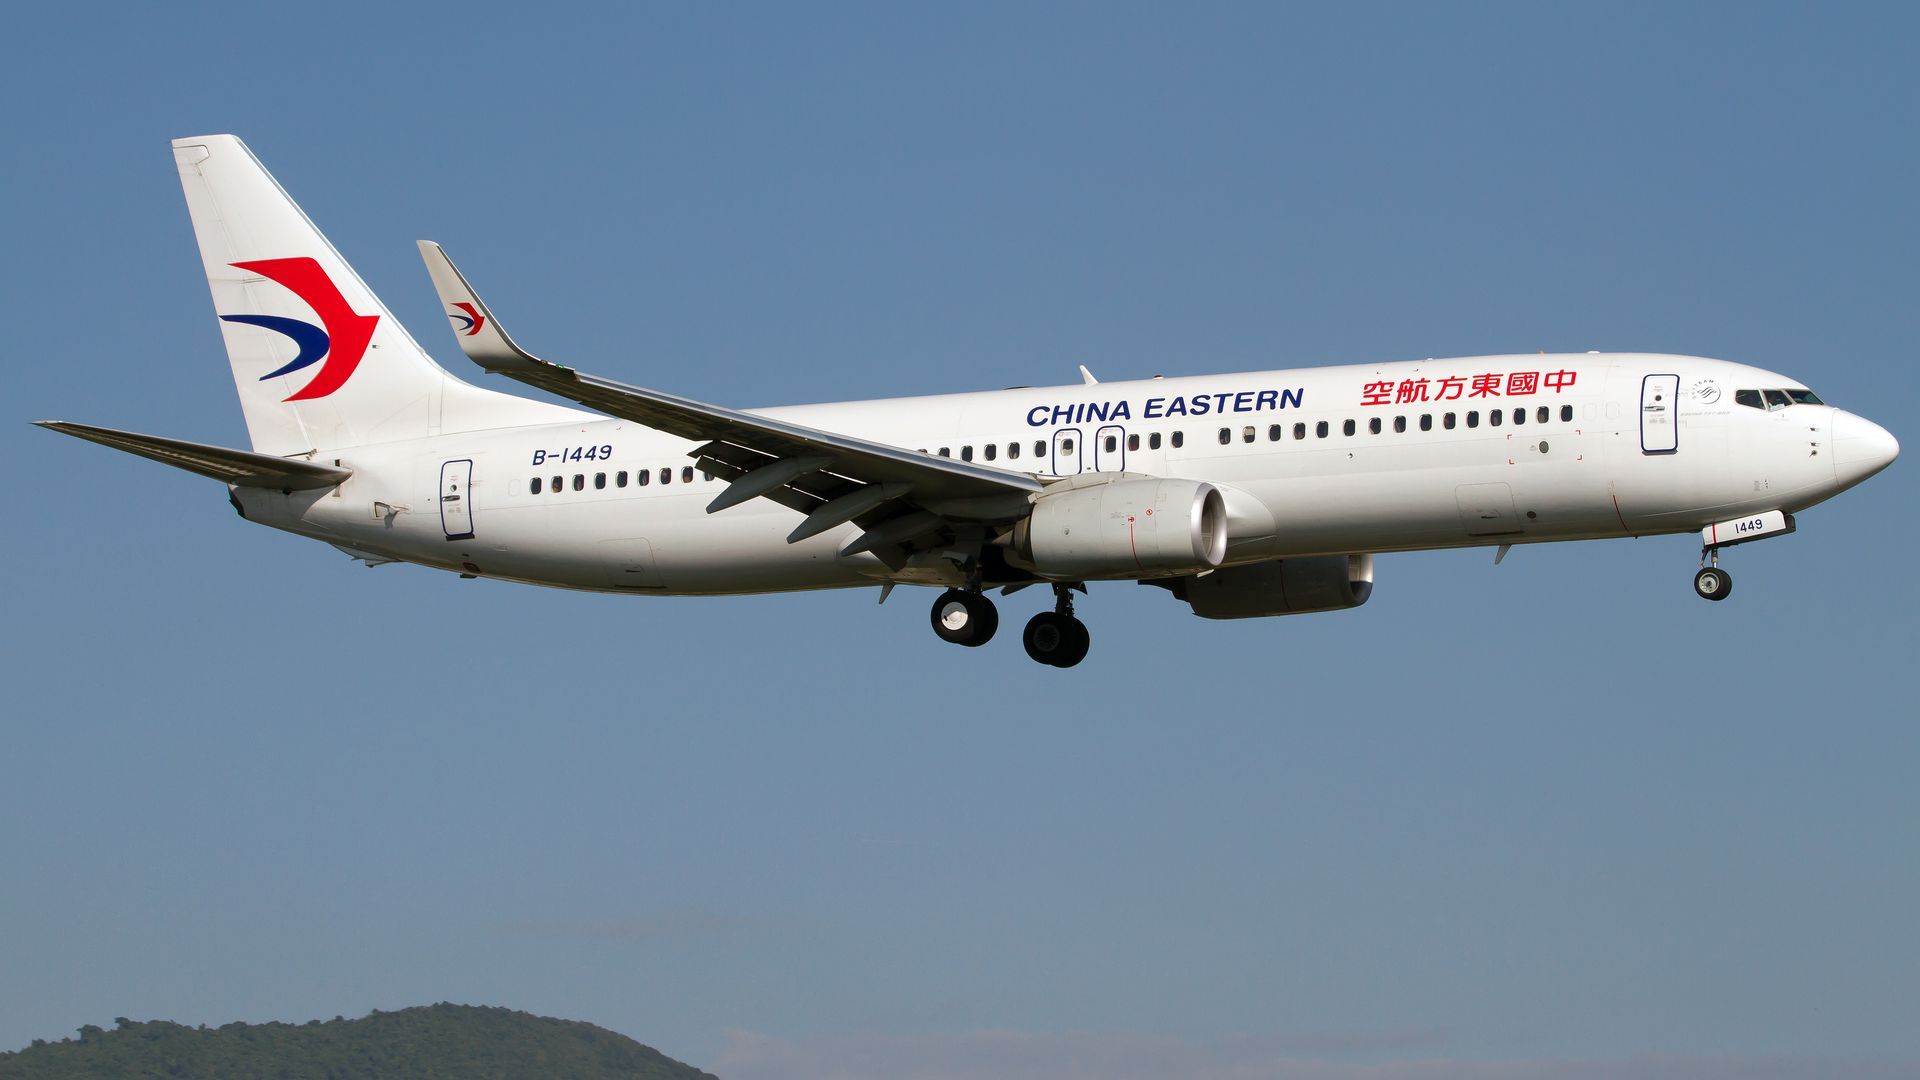 A plane in the air features the logo for China Eastern Airlines